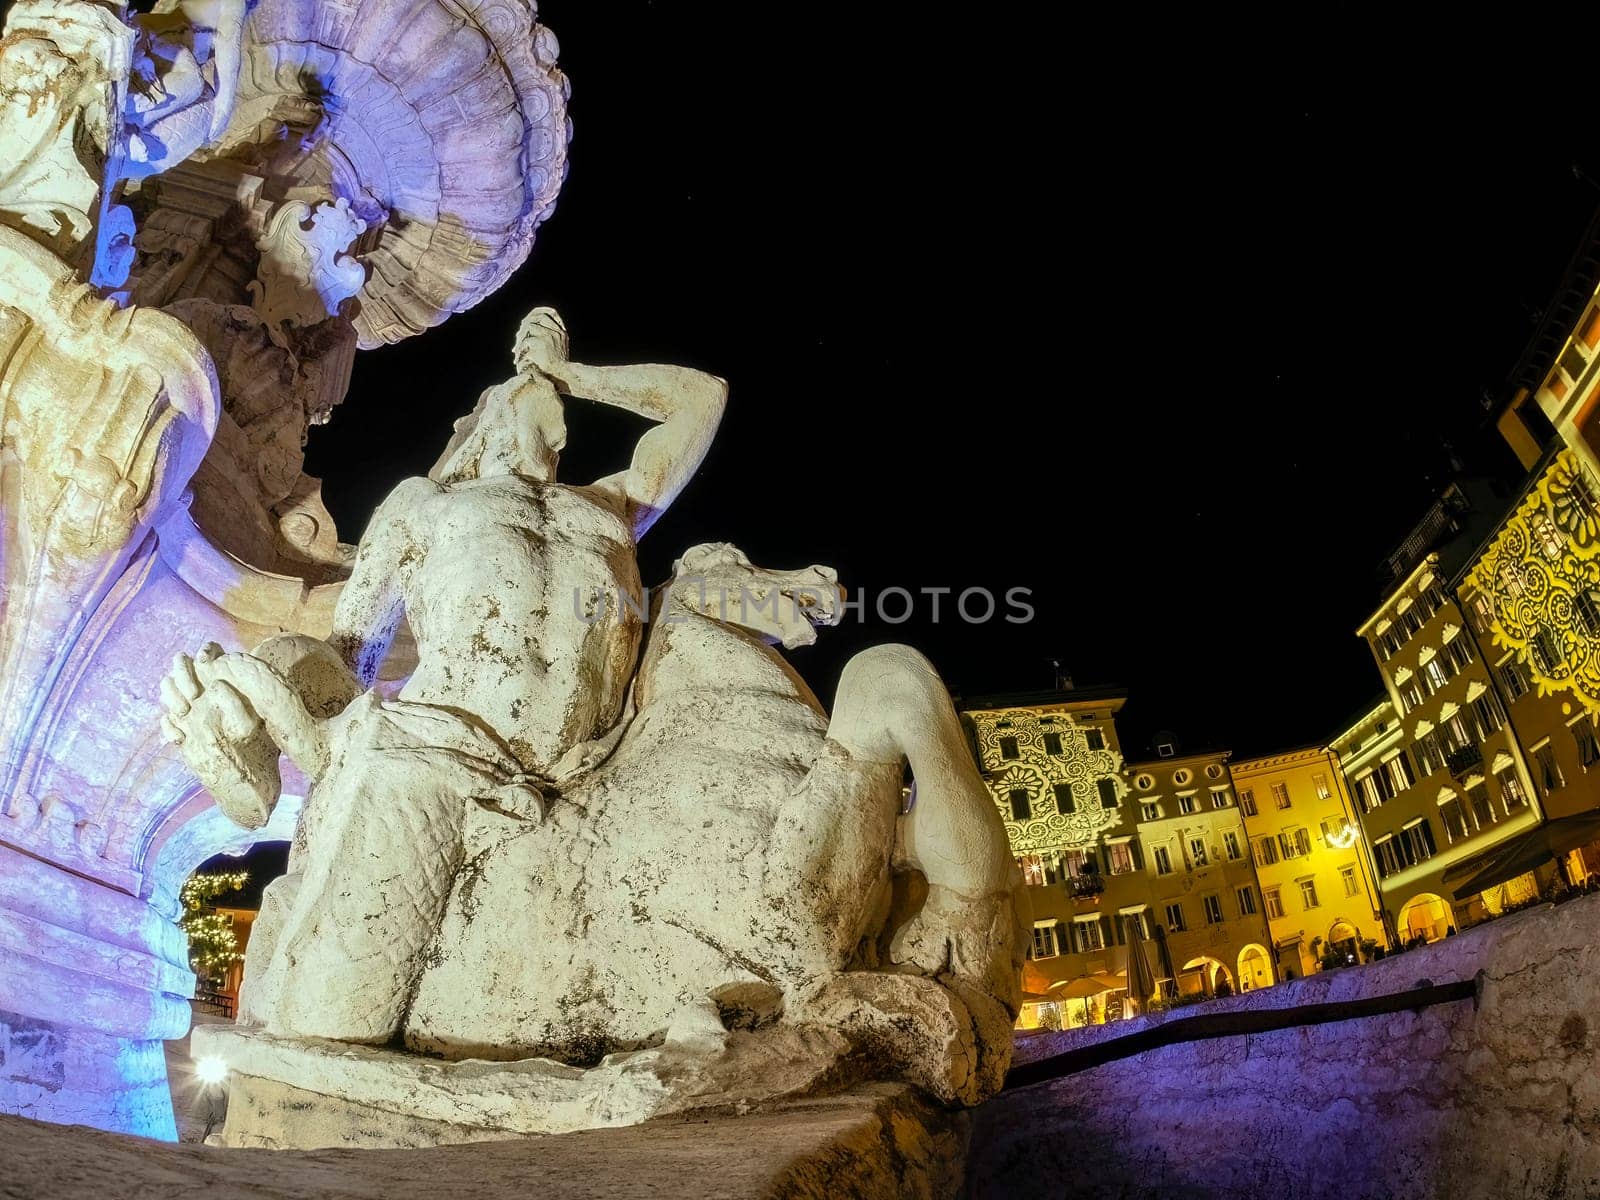 Neptune fountain trento dome night view at christmas by AndreaIzzotti